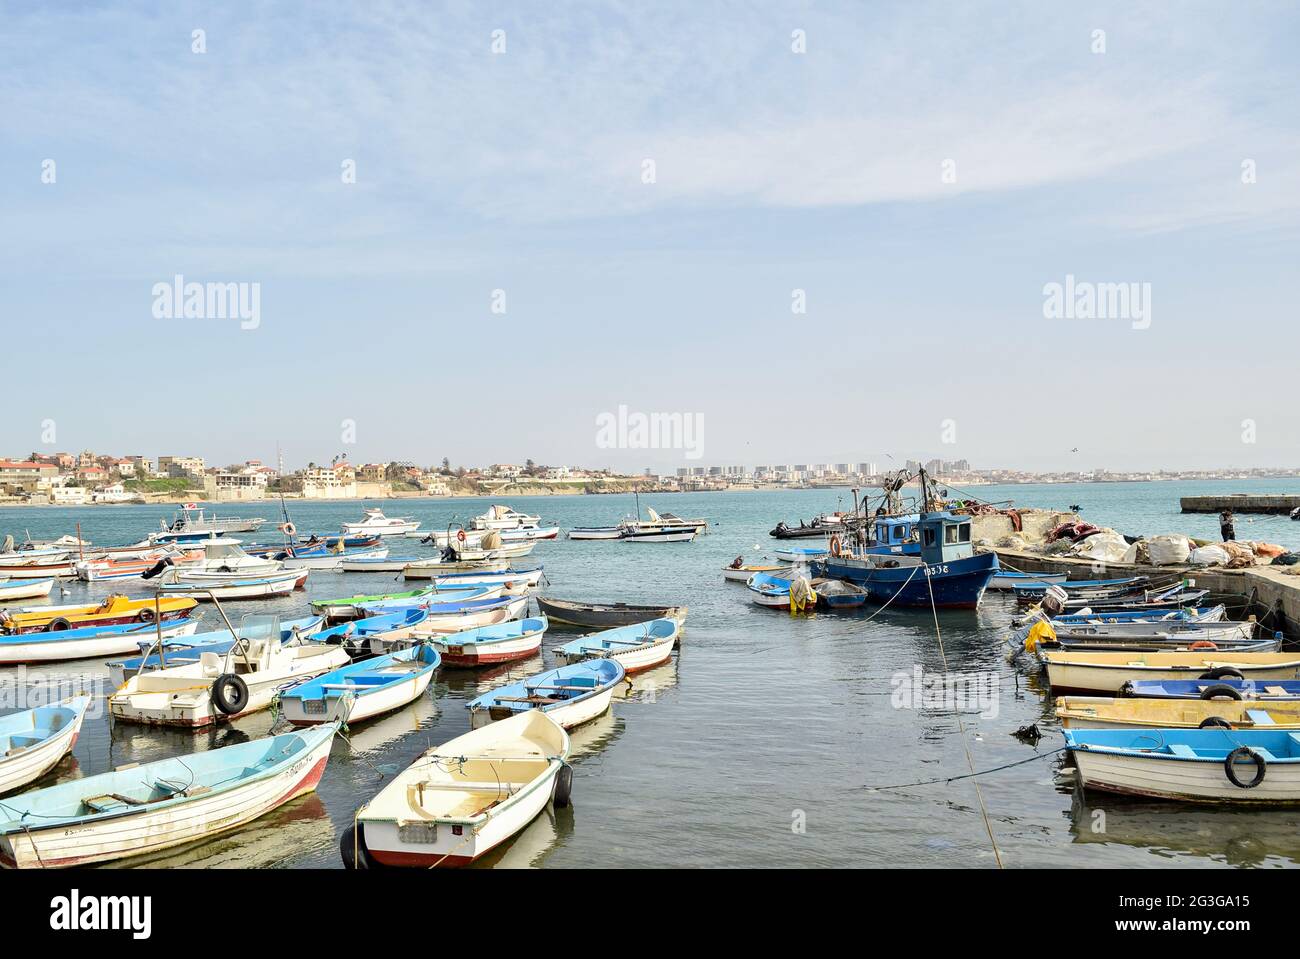 Fishing boats in an old port in Algiers, Algeria. Stock Photo